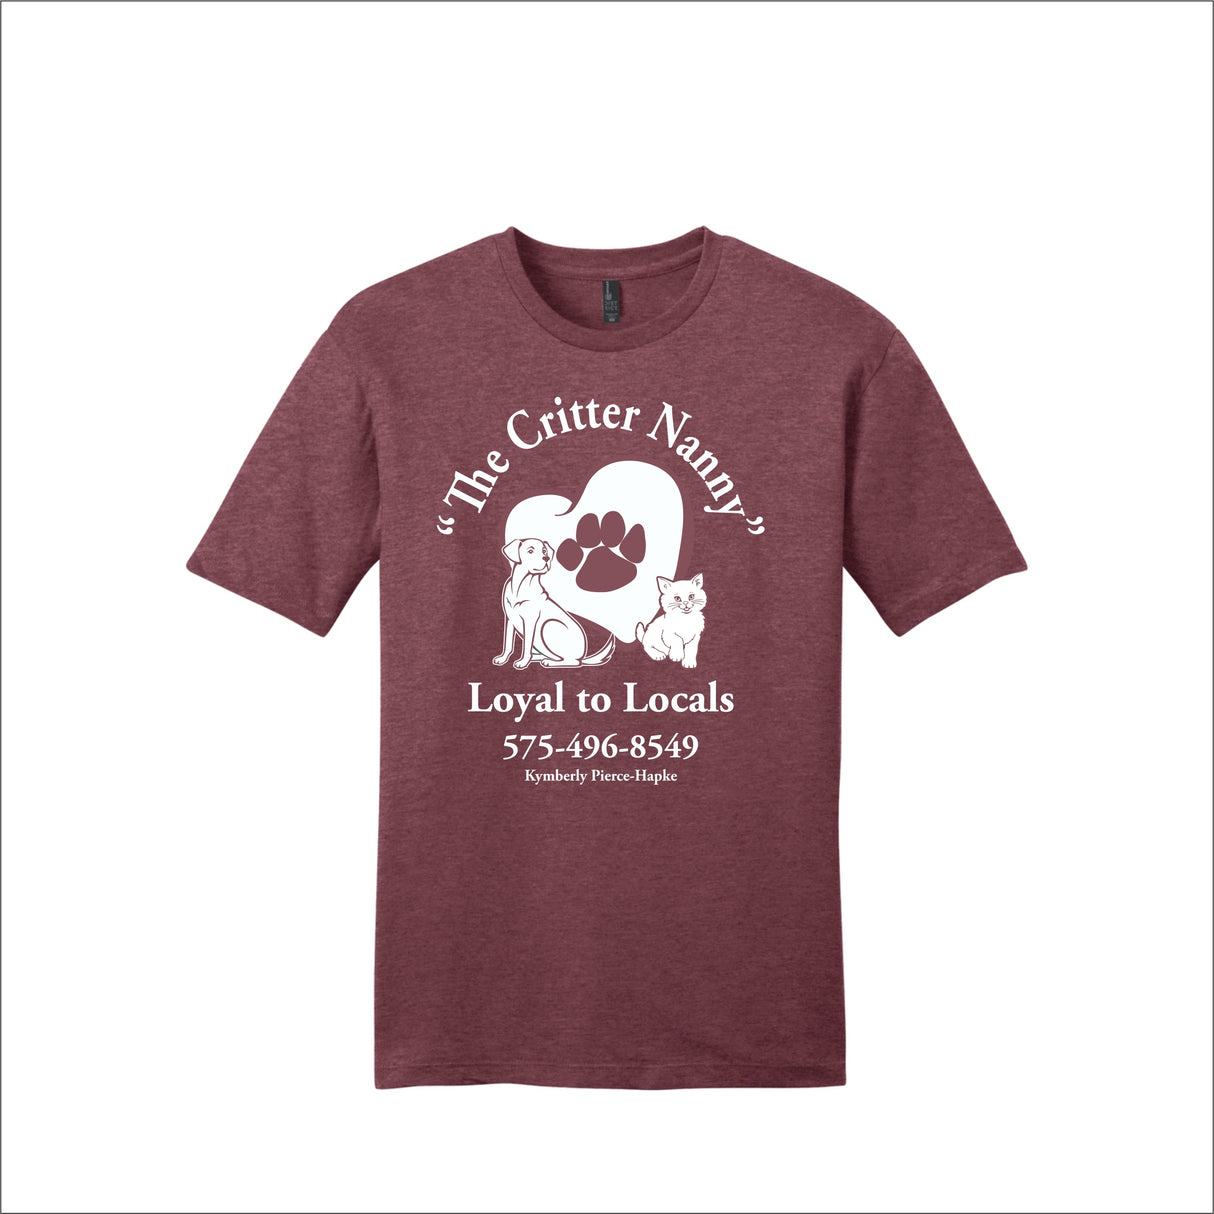 The Critter Nanny Loyal To Locals Tee